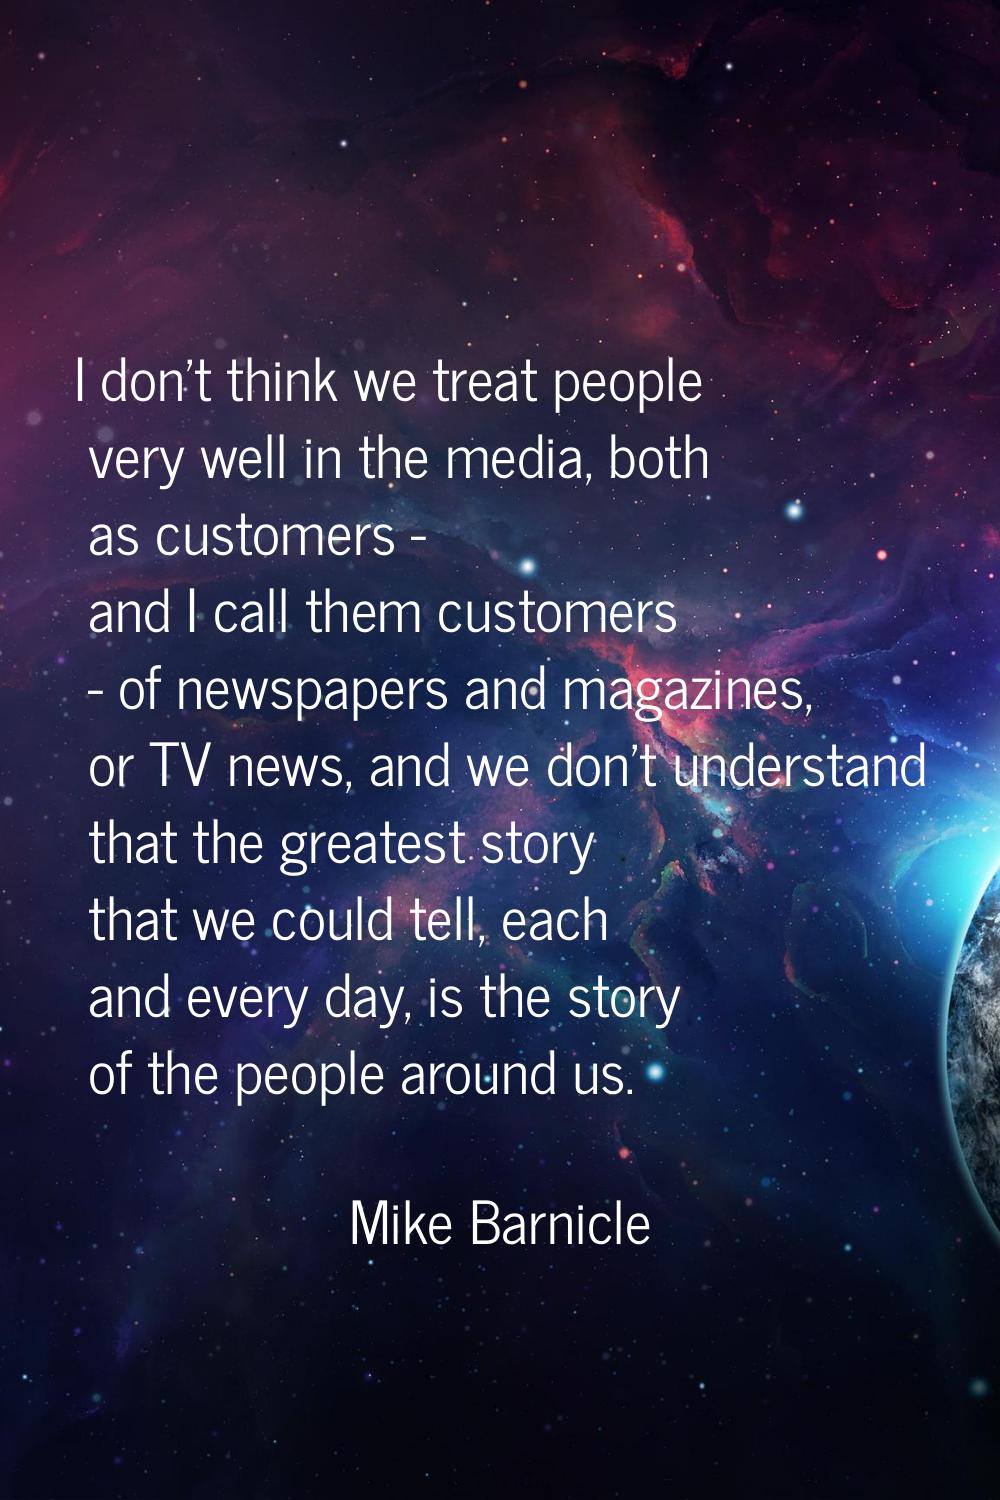 I don't think we treat people very well in the media, both as customers - and I call them customers